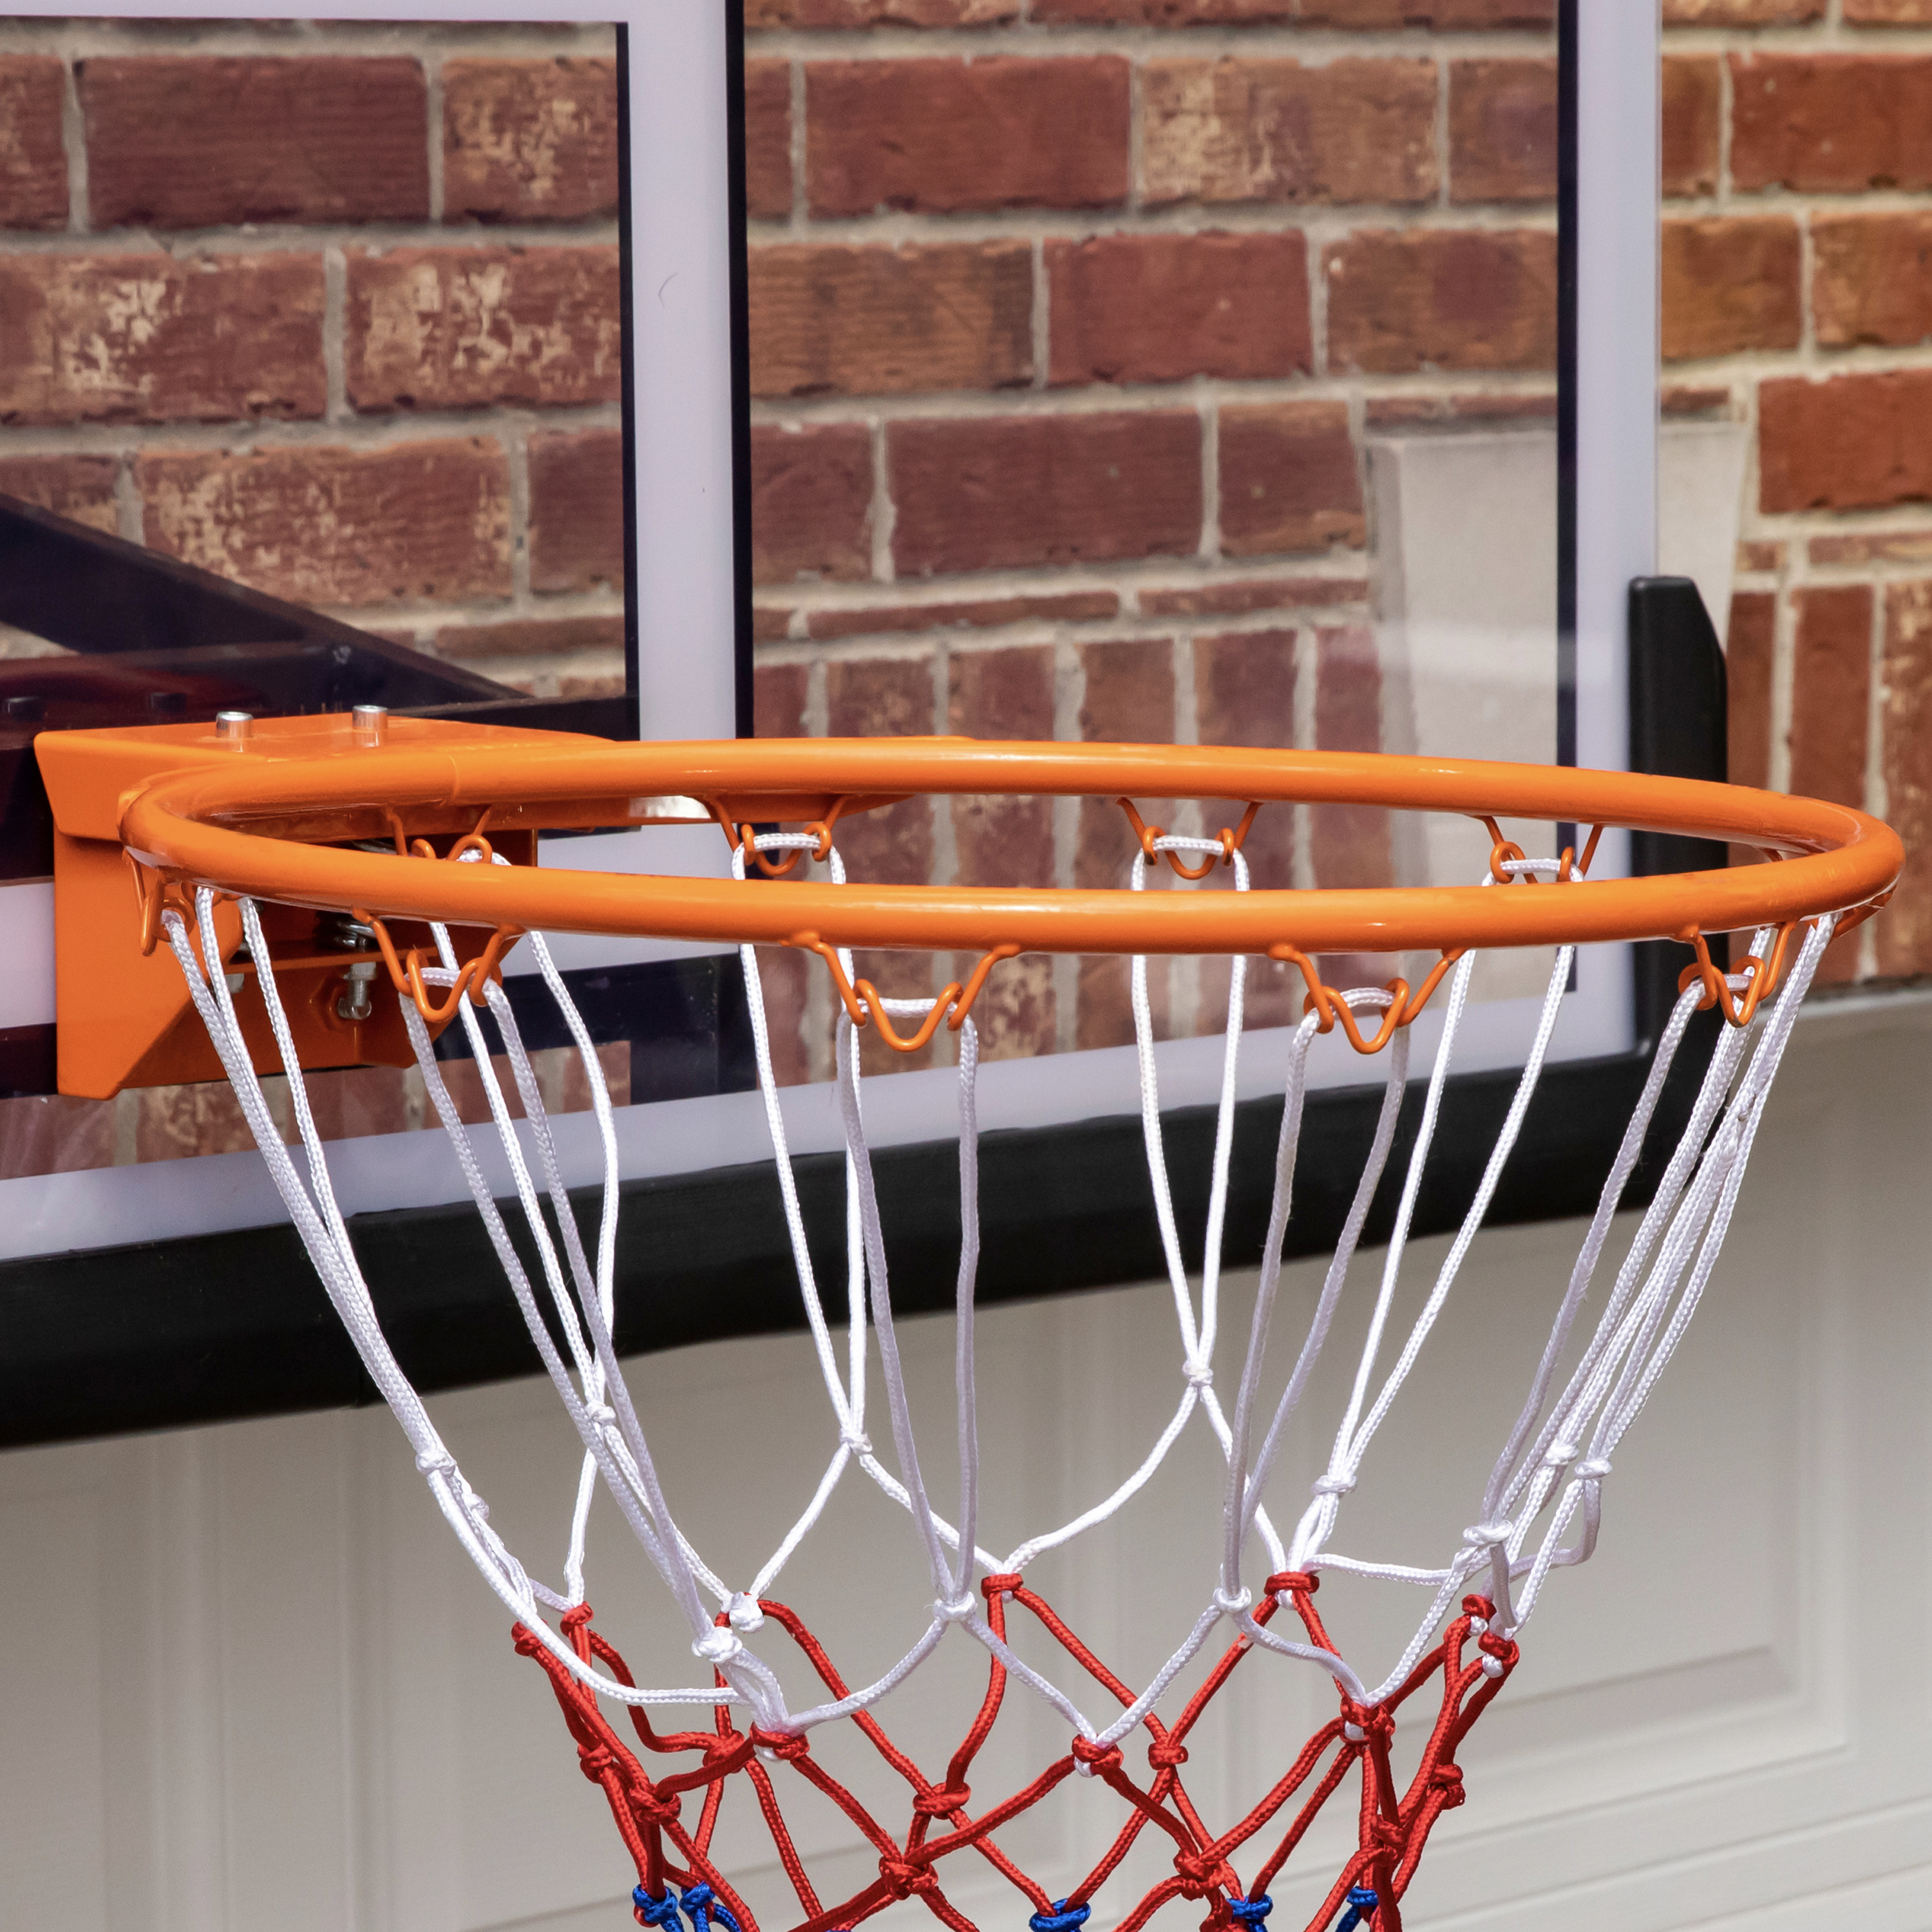 NBA Official 54 In. Wall-Mounted Basketball Hoop with Polycarbonate Backboard - image 4 of 9